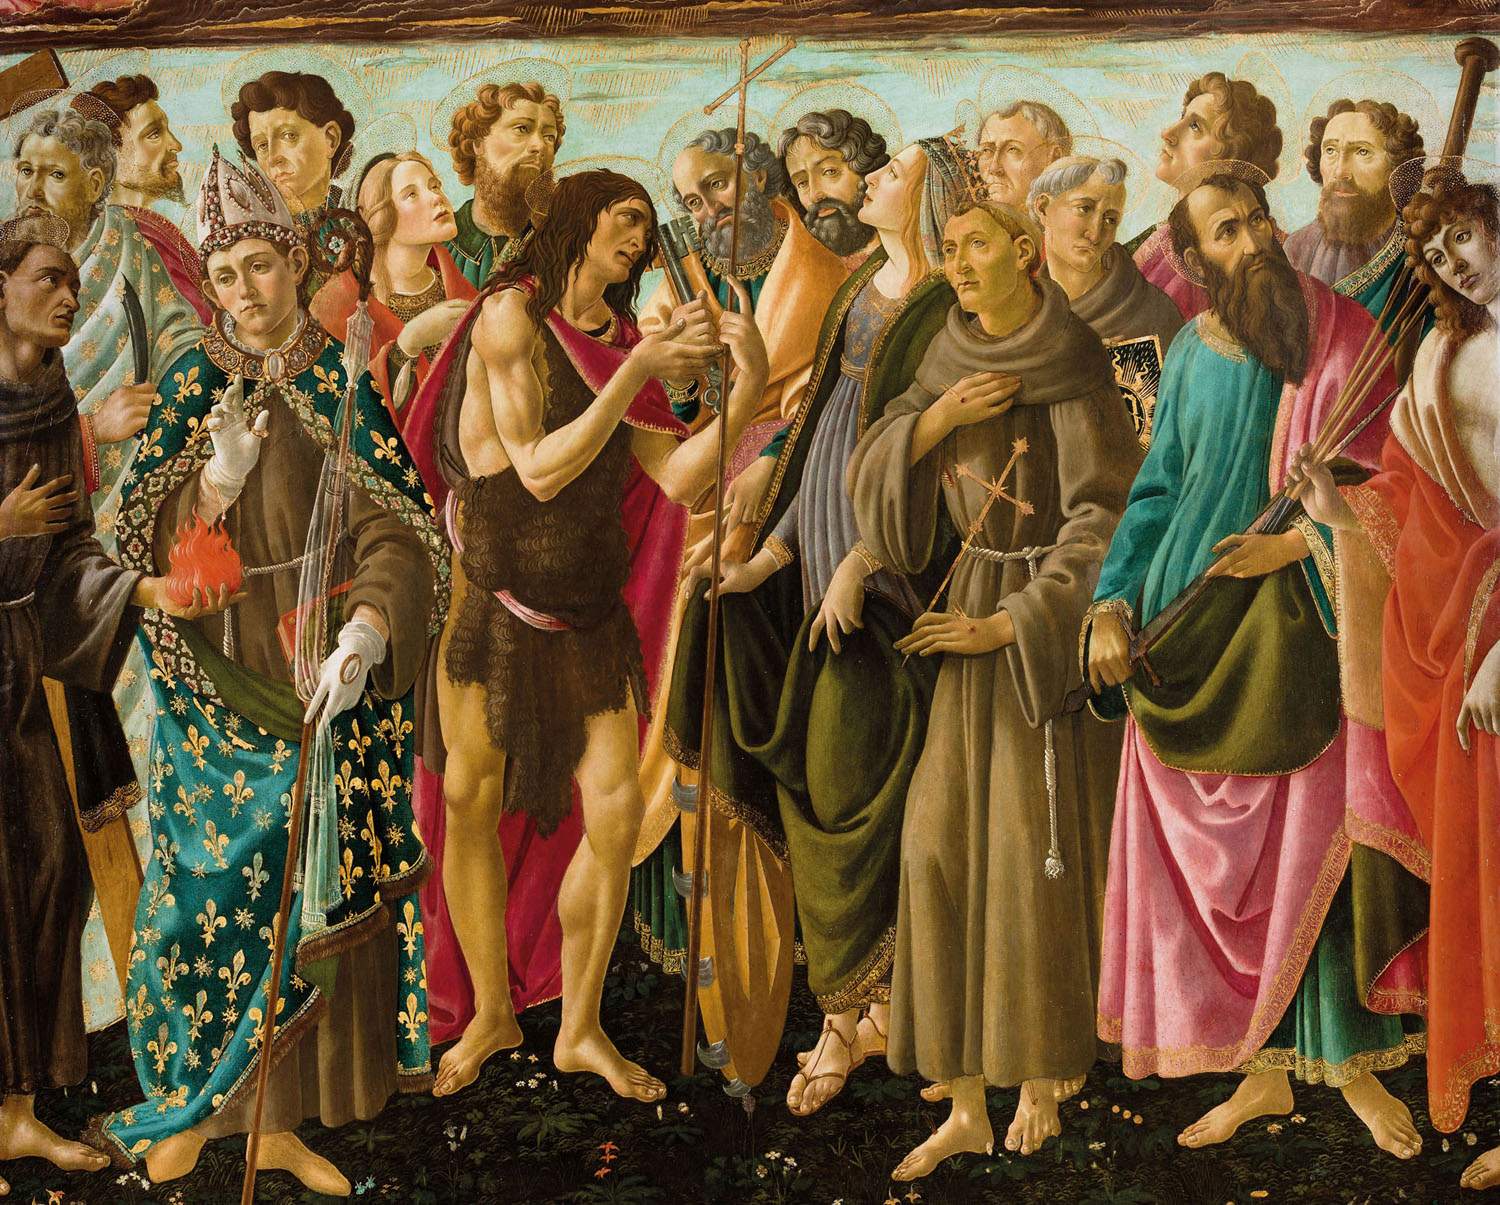 Botticelli returns home after two centuries. An exhibition in Montevarchi brings back works from the area